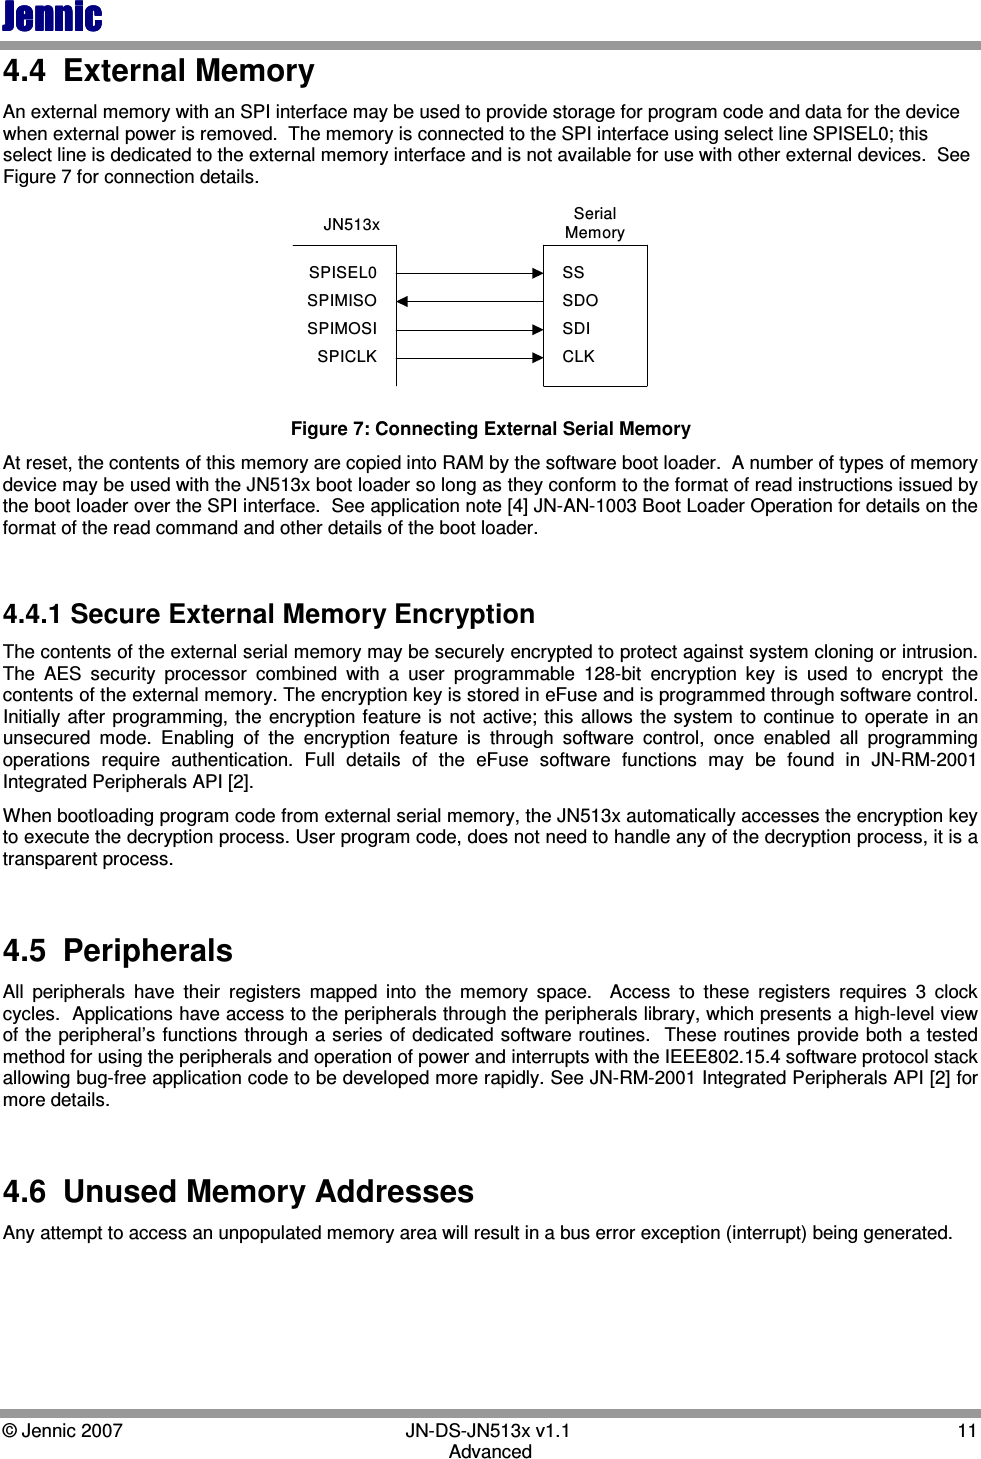 JennicJennicJennicJennic    © Jennic 2007        JN-DS-JN513x v1.1  11 Advanced 4.4  External Memory An external memory with an SPI interface may be used to provide storage for program code and data for the device when external power is removed.  The memory is connected to the SPI interface using select line SPISEL0; this select line is dedicated to the external memory interface and is not available for use with other external devices.  See Figure 7 for connection details. JN513x SerialMemorySPISEL0SPIMISOSPIMOSISPICLKSSSDOSDICLK Figure 7: Connecting External Serial Memory At reset, the contents of this memory are copied into RAM by the software boot loader.  A number of types of memory device may be used with the JN513x boot loader so long as they conform to the format of read instructions issued by the boot loader over the SPI interface.  See application note [4] JN-AN-1003 Boot Loader Operation for details on the format of the read command and other details of the boot loader.  4.4.1 Secure External Memory Encryption The contents of the external serial memory may be securely encrypted to protect against system cloning or intrusion. The  AES  security  processor  combined  with  a  user  programmable  128-bit  encryption  key  is  used  to  encrypt  the contents of the external memory. The encryption key is stored in eFuse and is programmed through software control.  Initially after  programming, the  encryption  feature is  not  active; this  allows  the system to continue to  operate in an unsecured  mode.  Enabling  of  the  encryption  feature  is  through  software  control,  once  enabled  all  programming operations  require  authentication.  Full  details  of  the  eFuse  software  functions  may  be  found  in  JN-RM-2001 Integrated Peripherals API [2]. When bootloading program code from external serial memory, the JN513x automatically accesses the encryption key to execute the decryption process. User program code, does not need to handle any of the decryption process, it is a transparent process.  4.5  Peripherals All  peripherals  have  their  registers  mapped  into  the  memory  space.    Access  to  these  registers  requires  3  clock cycles.  Applications have access to the peripherals through the peripherals library, which presents a high-level view of the peripheral’s functions through a series of dedicated software routines.  These routines provide both a tested method for using the peripherals and operation of power and interrupts with the IEEE802.15.4 software protocol stack allowing bug-free application code to be developed more rapidly. See JN-RM-2001 Integrated Peripherals API [2] for more details.  4.6  Unused Memory Addresses Any attempt to access an unpopulated memory area will result in a bus error exception (interrupt) being generated.  